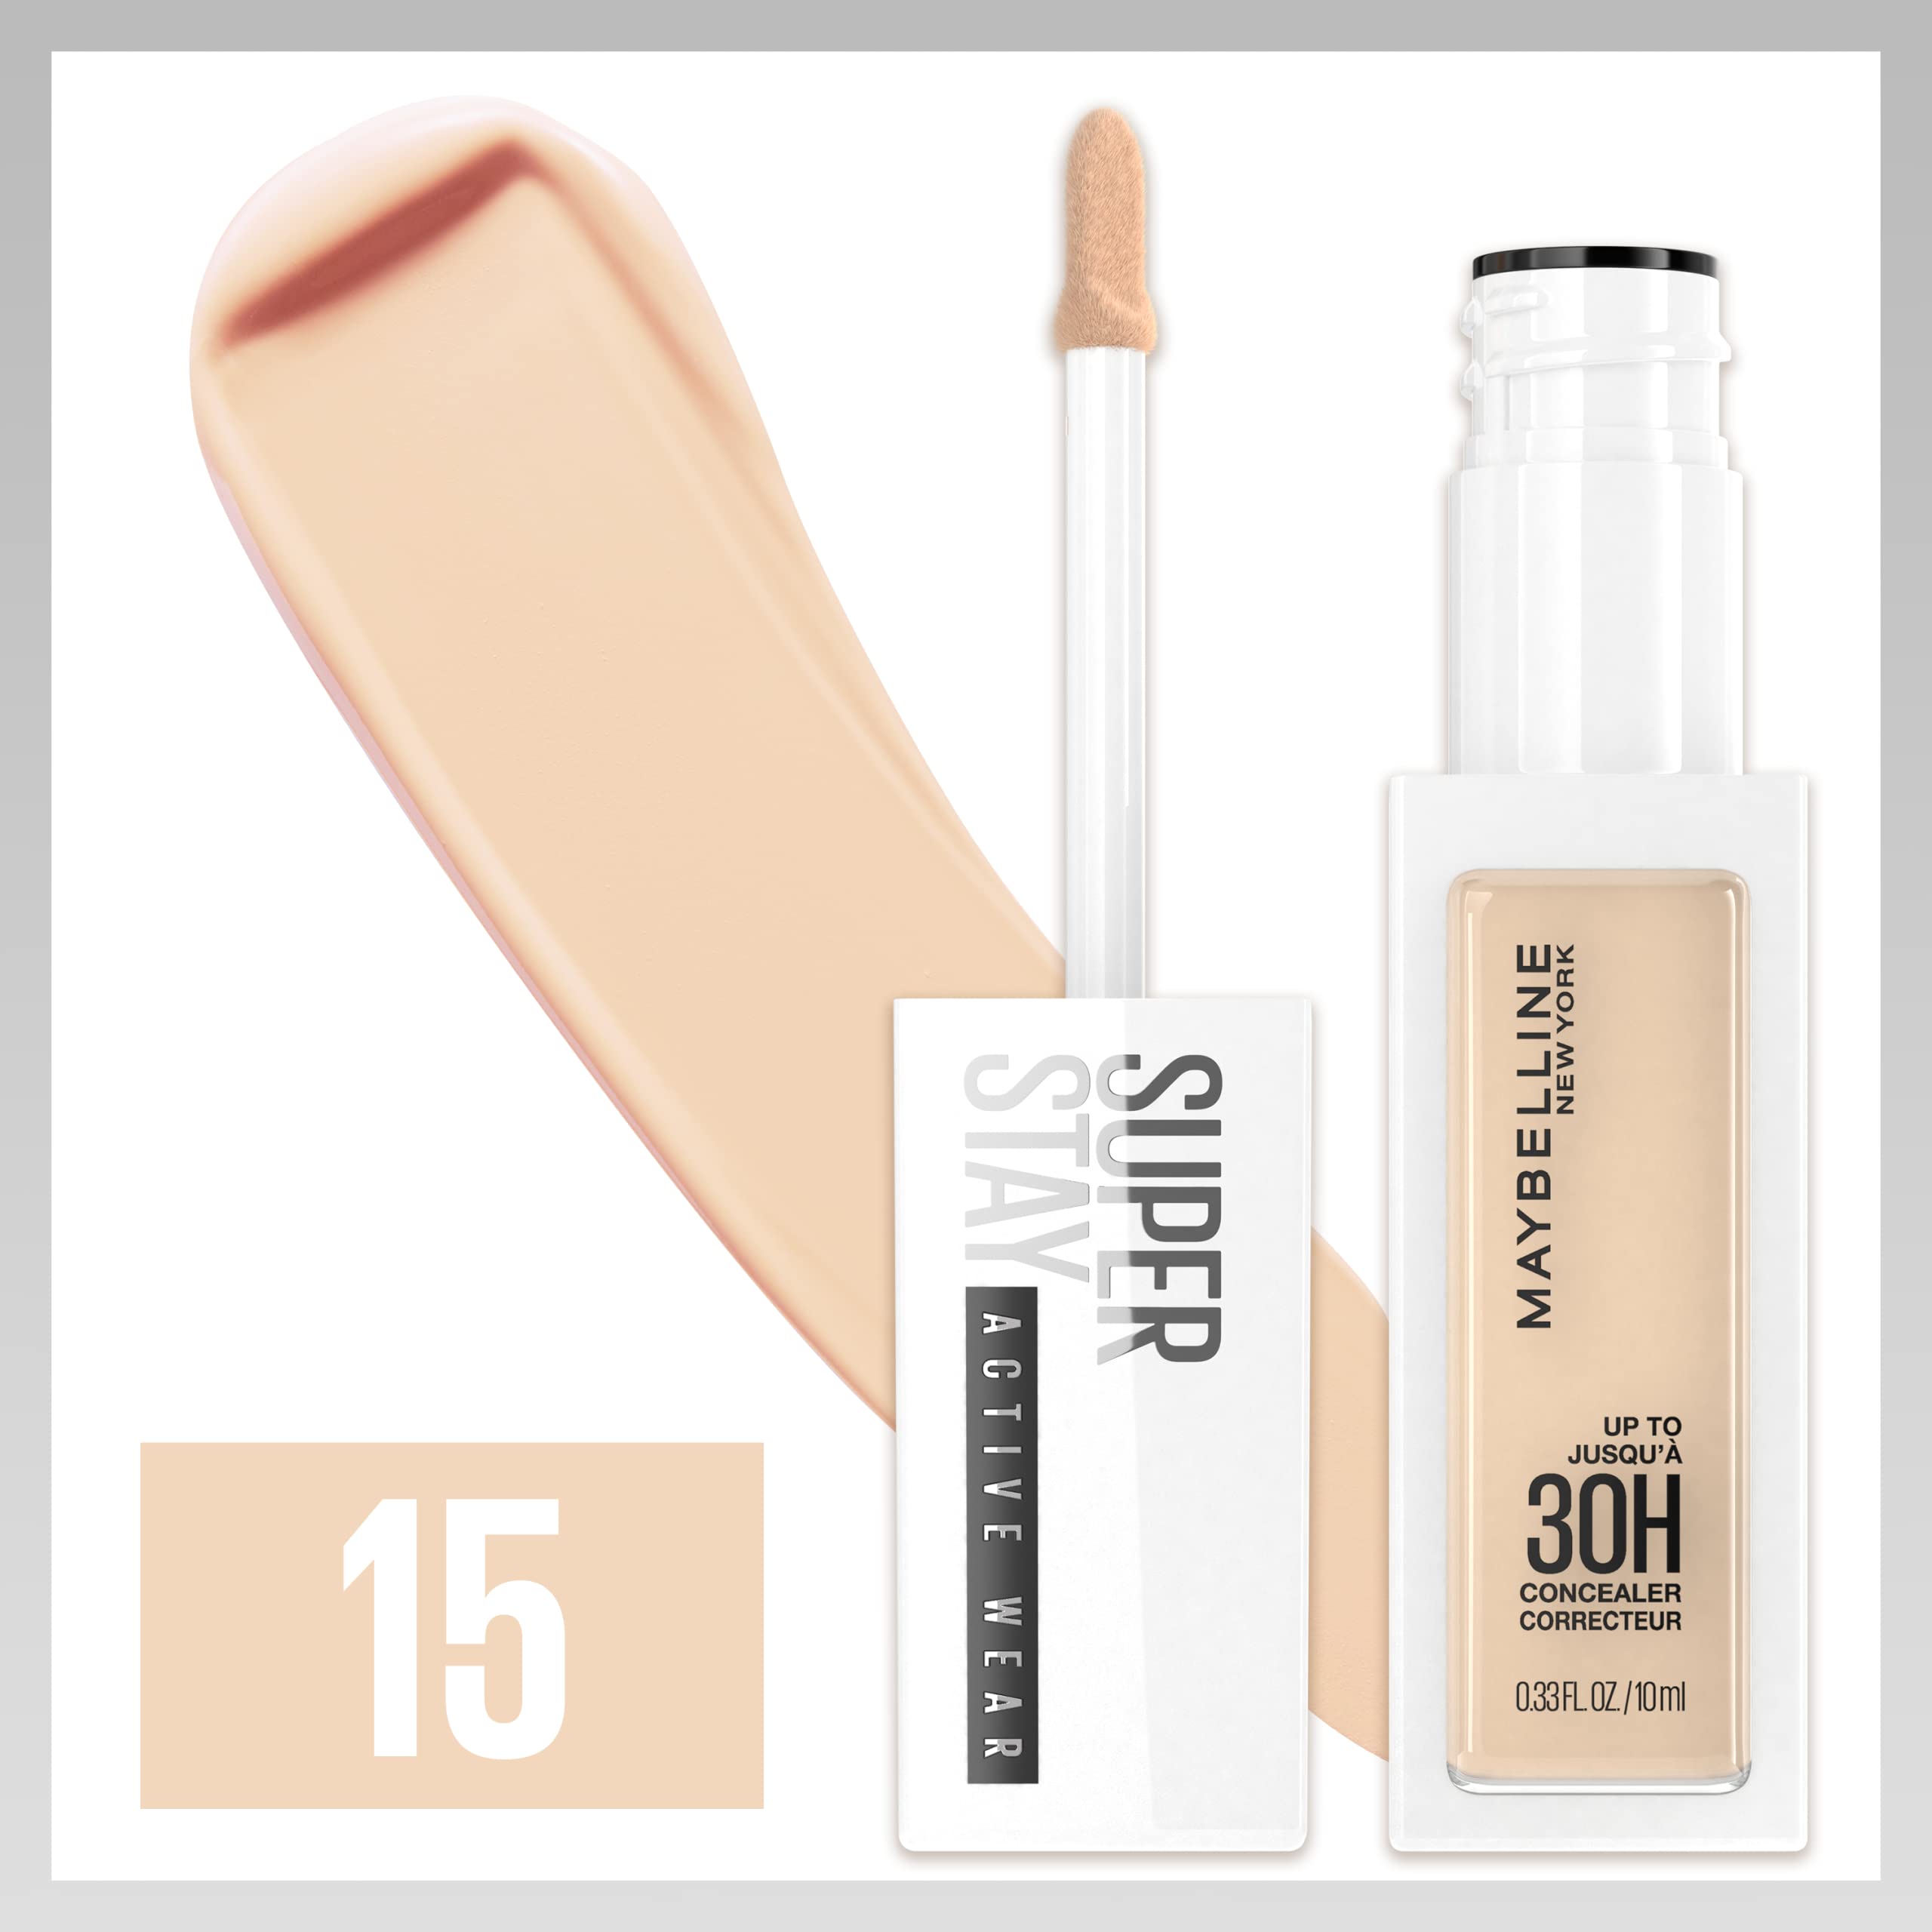 Maybelline New York Super Stay Liquid Concealer Makeup, Full Coverage Concealer, Up to 30 Hour Wear, Transfer Resistant, Natural Matte Finish, Oil-free, Available in 16 Shades, 15, 1 Count